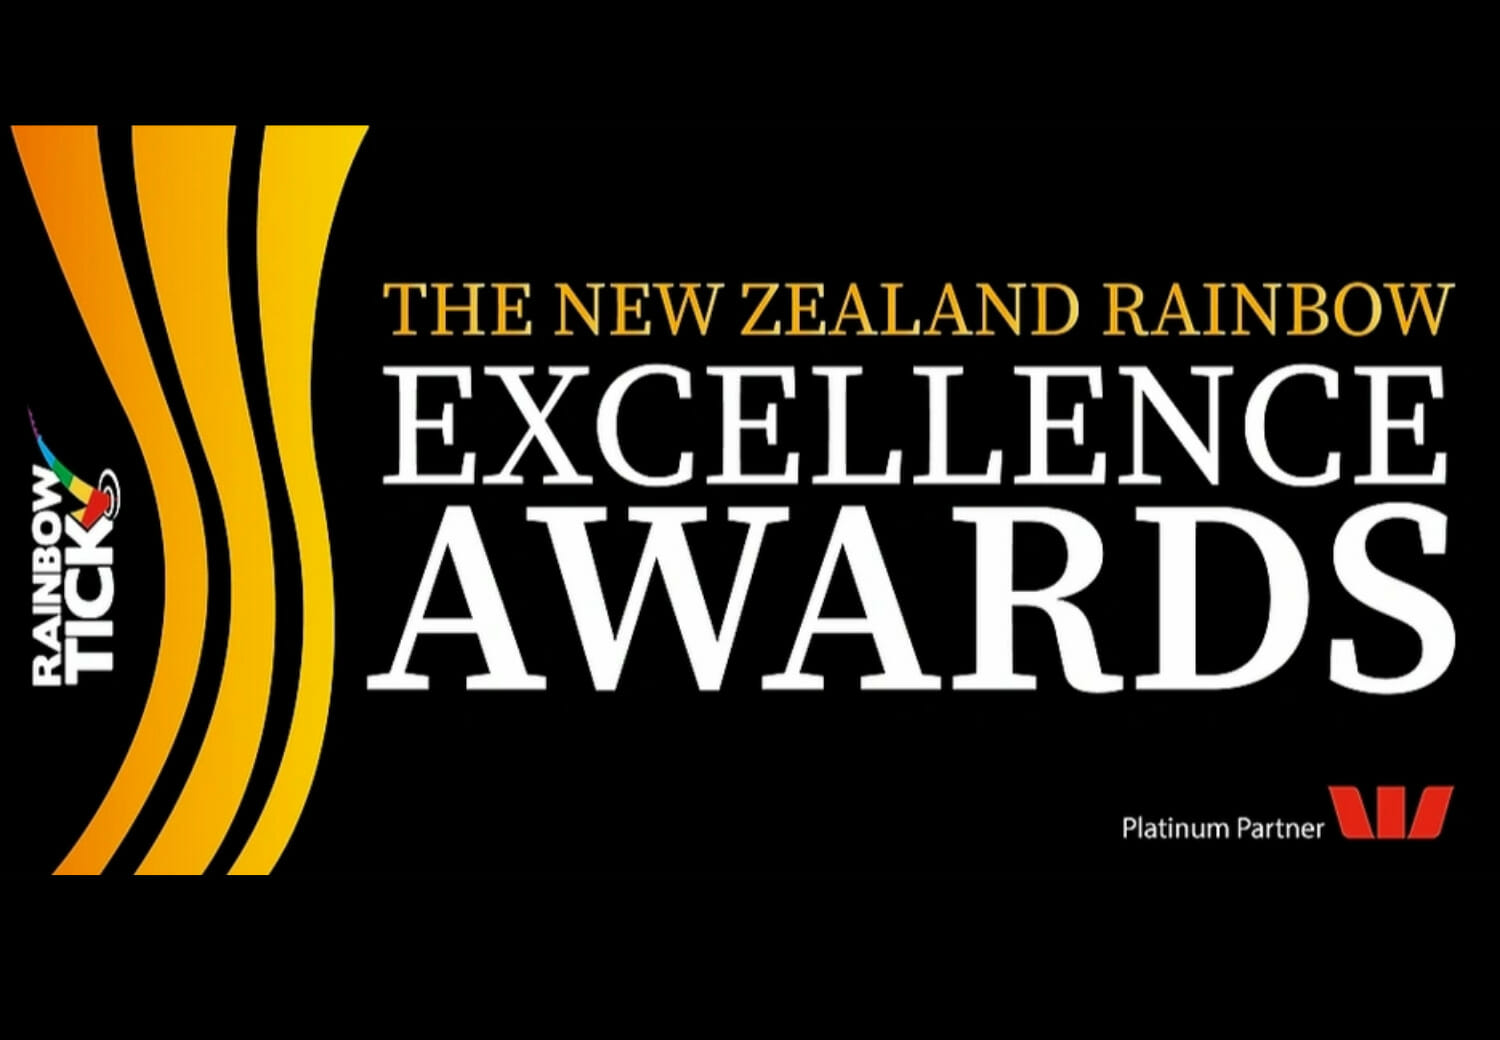 New Zealand rainbow excellence awards poster